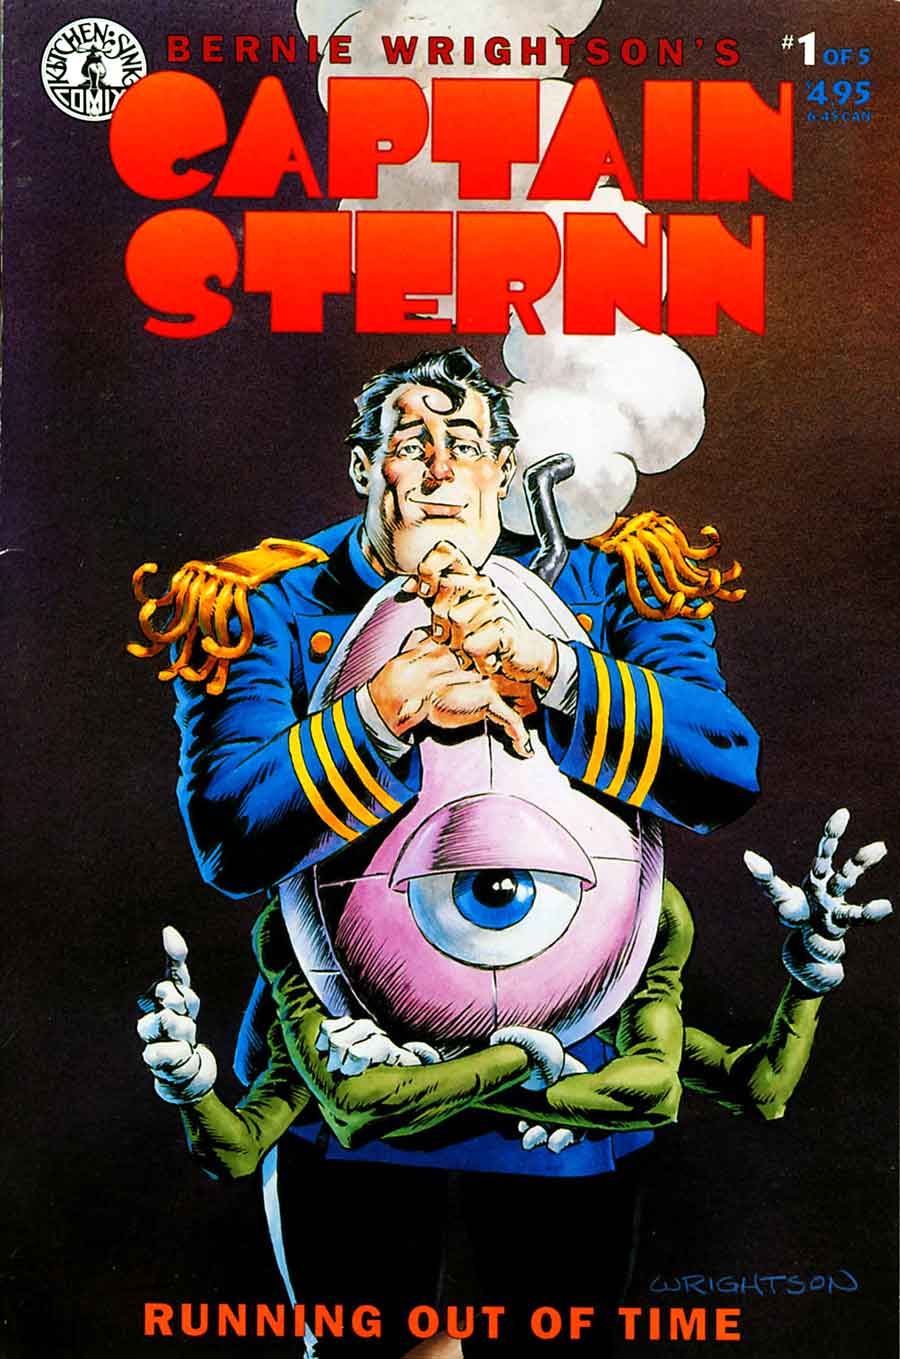 Captain Sternn, Running Out of Time #1 cover by Bernie Wrightson